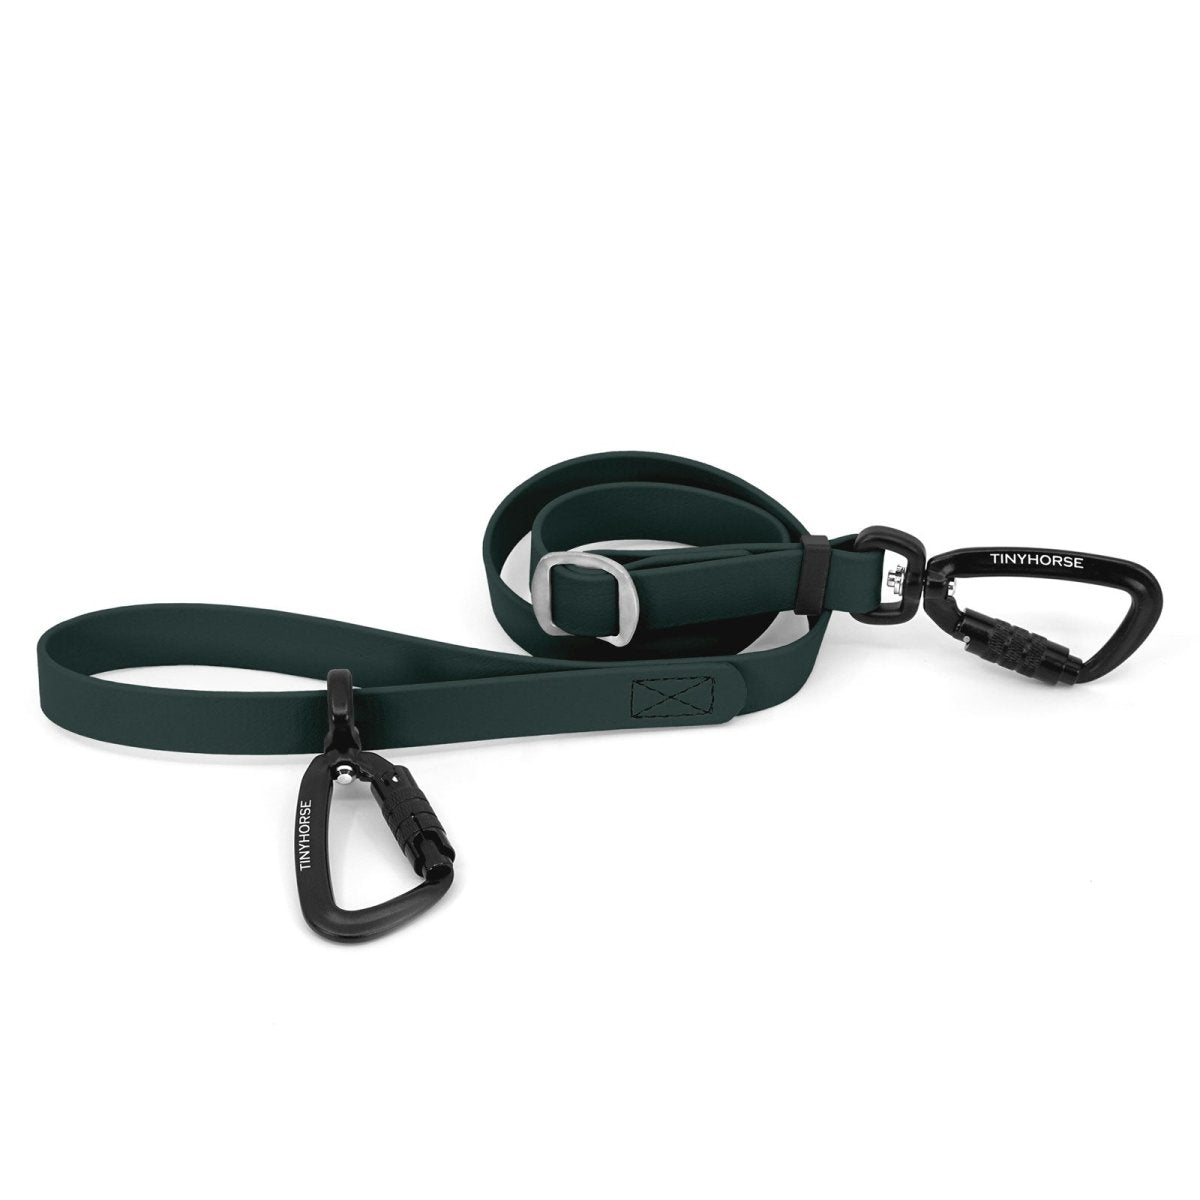 An adjustable dark green-coloured Lead-All Pro made of BioThane with 2 auto-locking carabiners